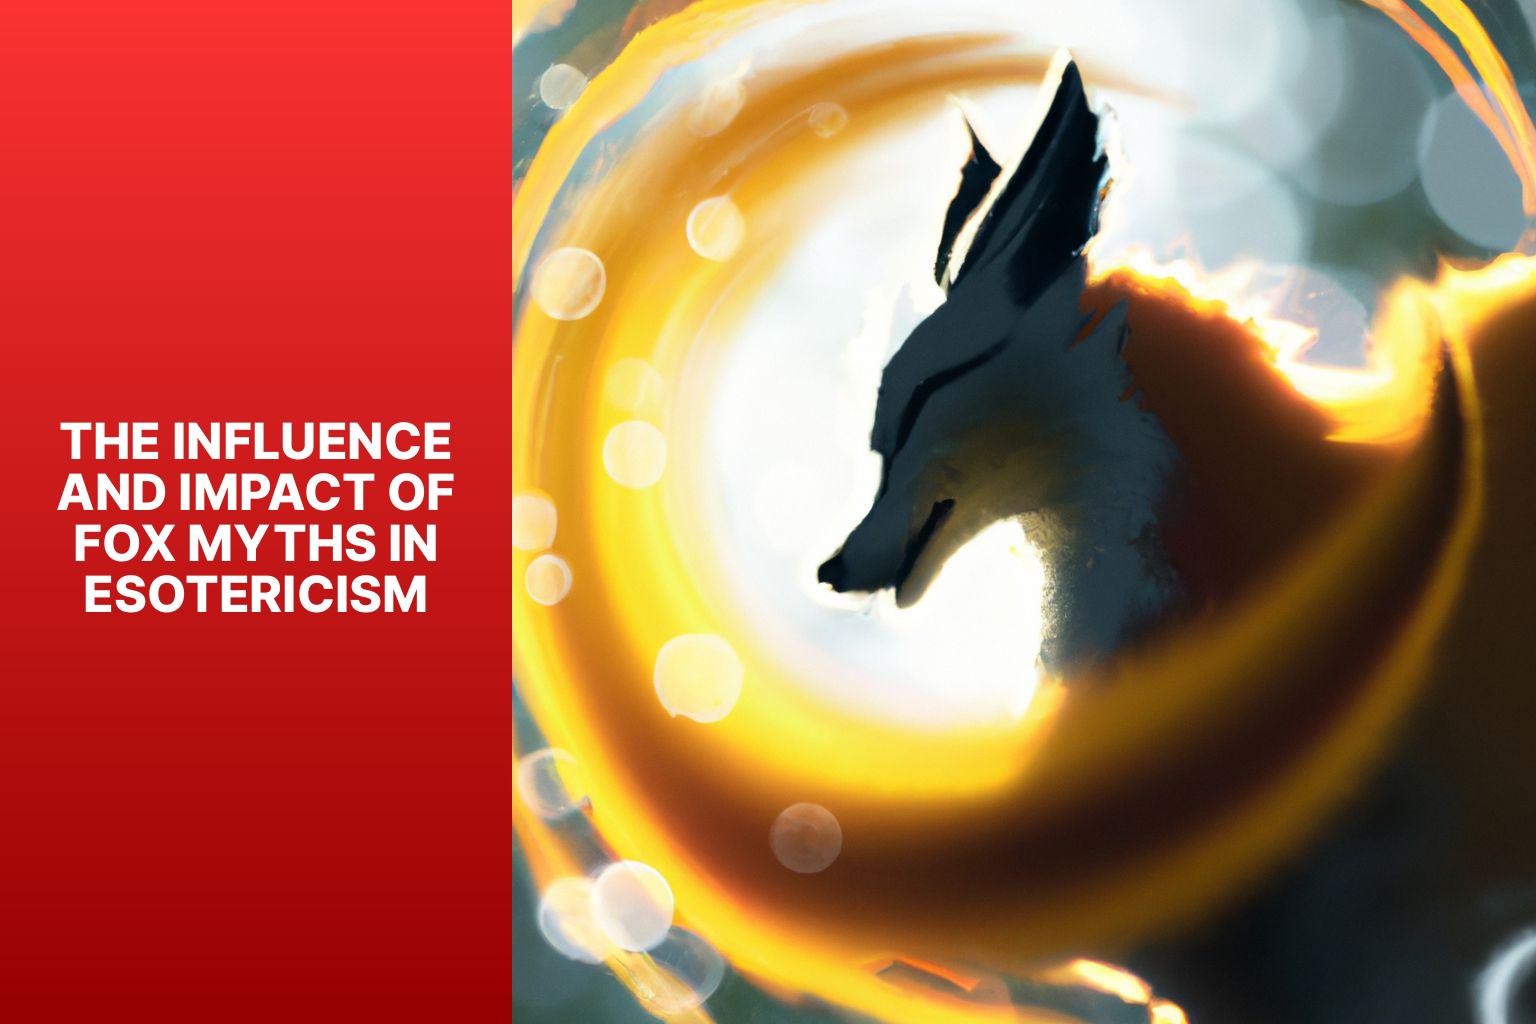 The Influence and Impact of Fox Myths in Esotericism - Fox Myths in Esotericism 